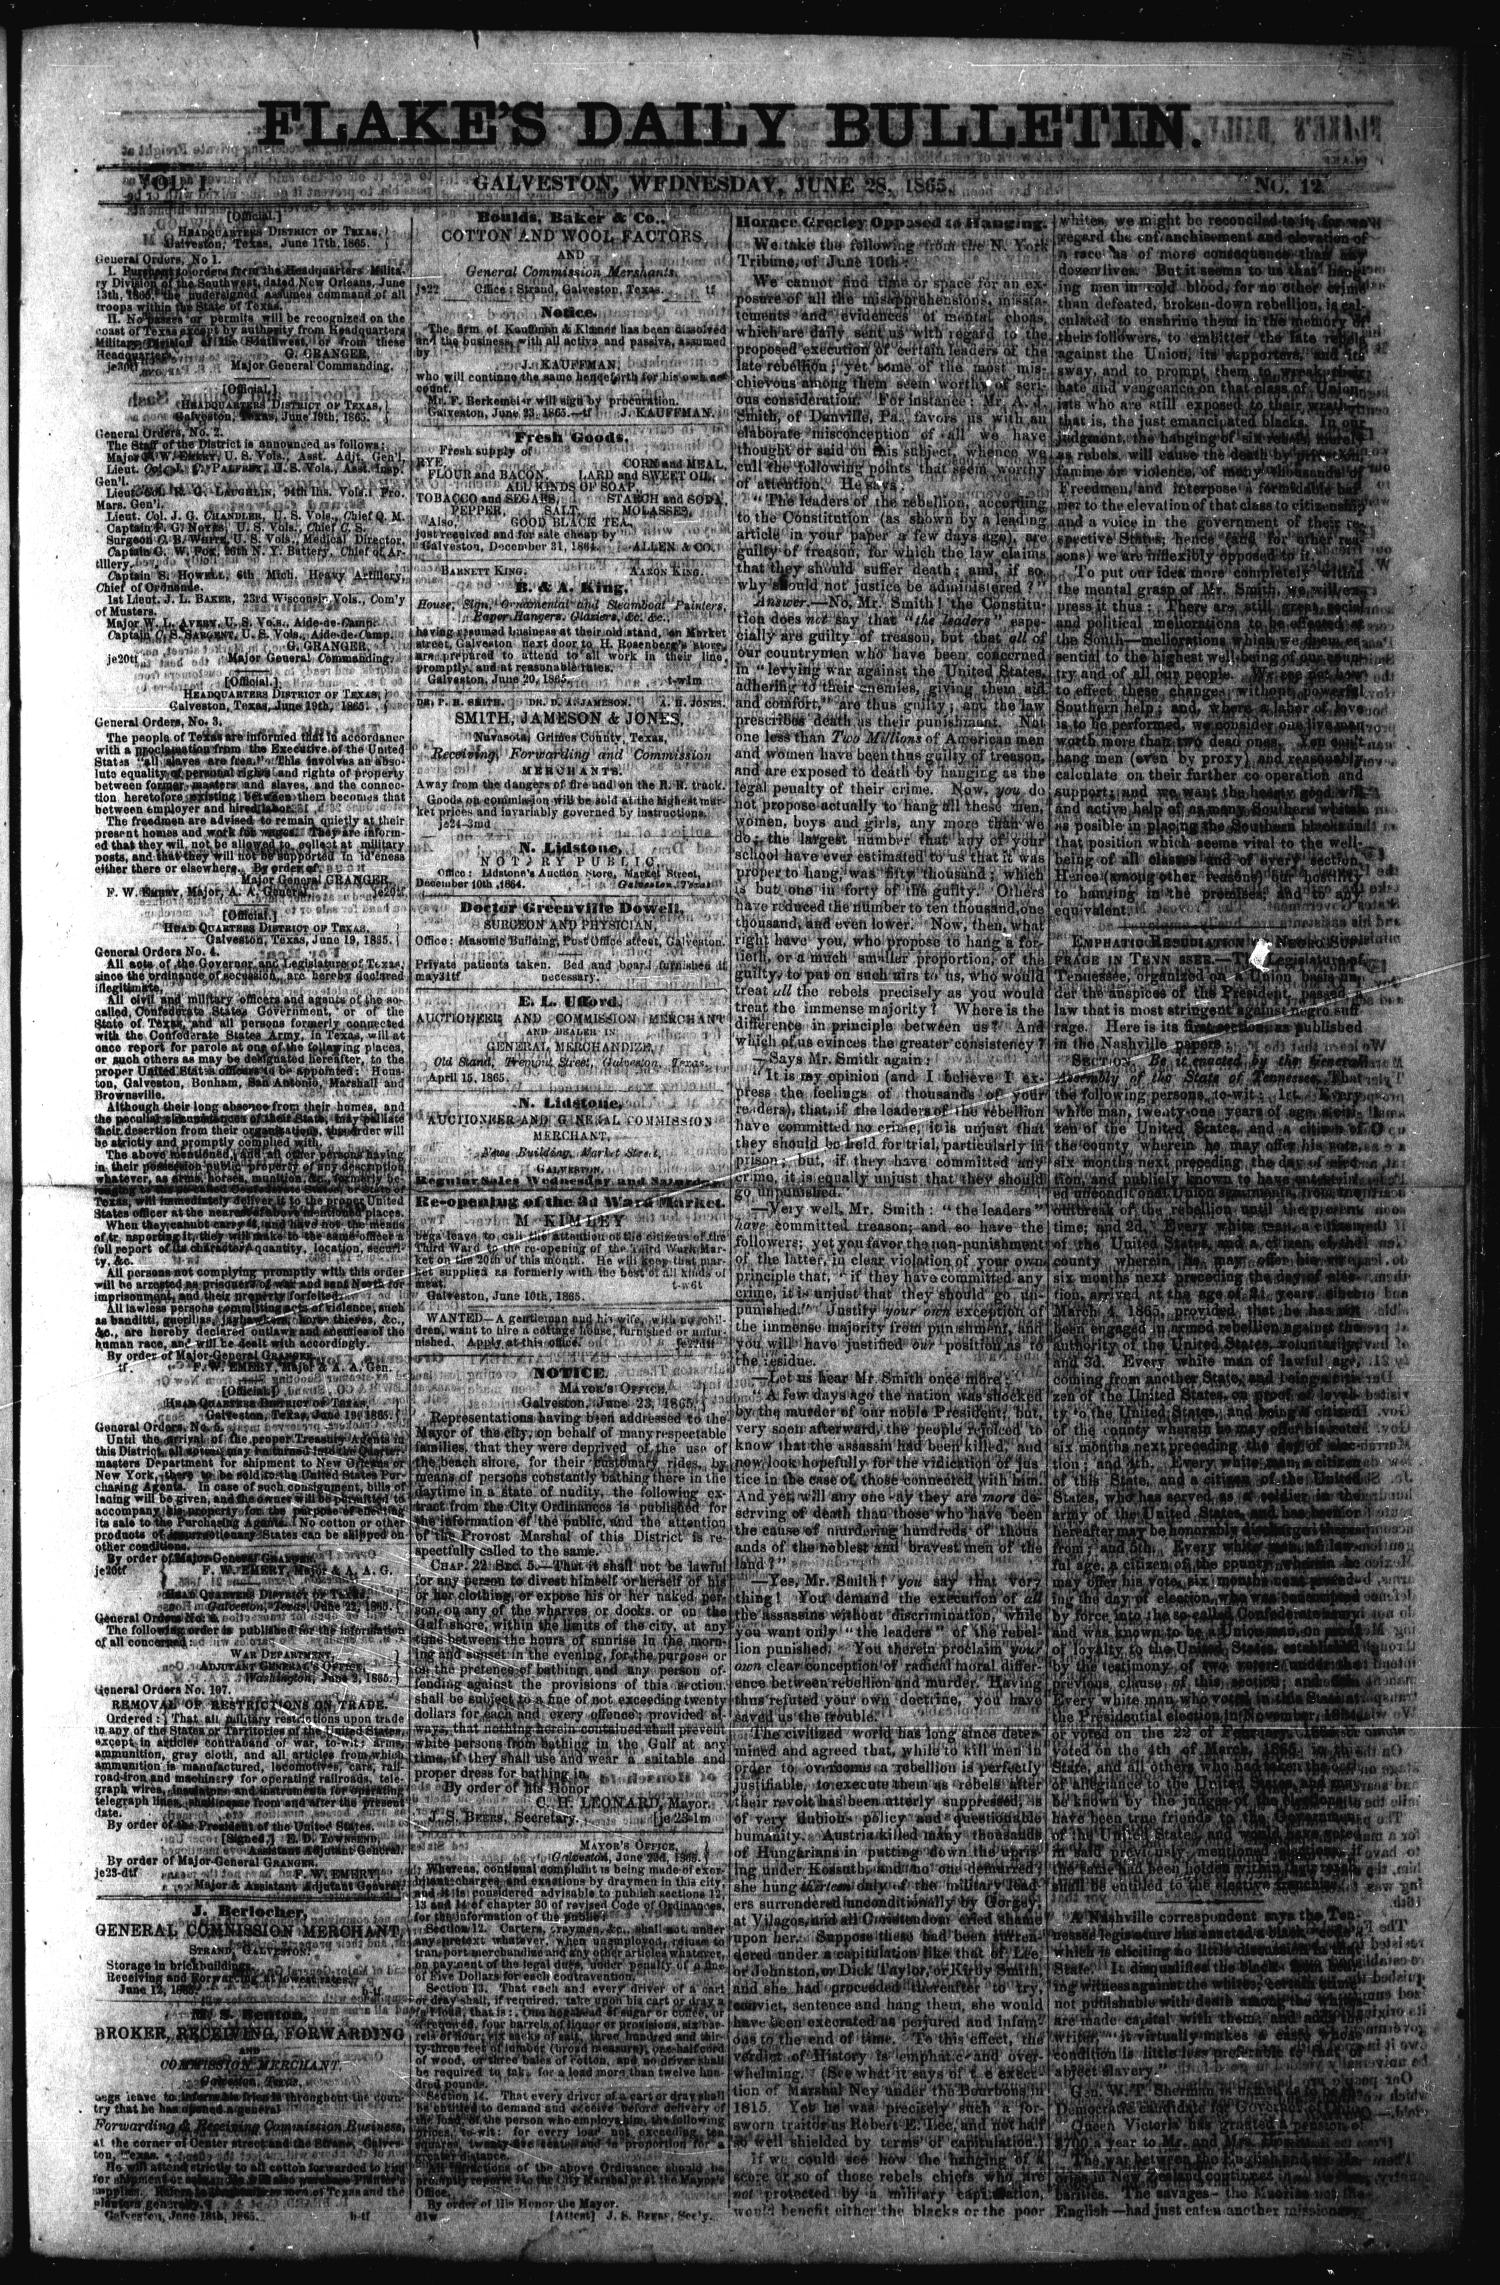 Flake's Daily Bulletin. (Galveston, Tex.), Vol. 1, No. 12, Ed. 1 Wednesday, June 28, 1865
                                                
                                                    [Sequence #]: 1 of 2
                                                